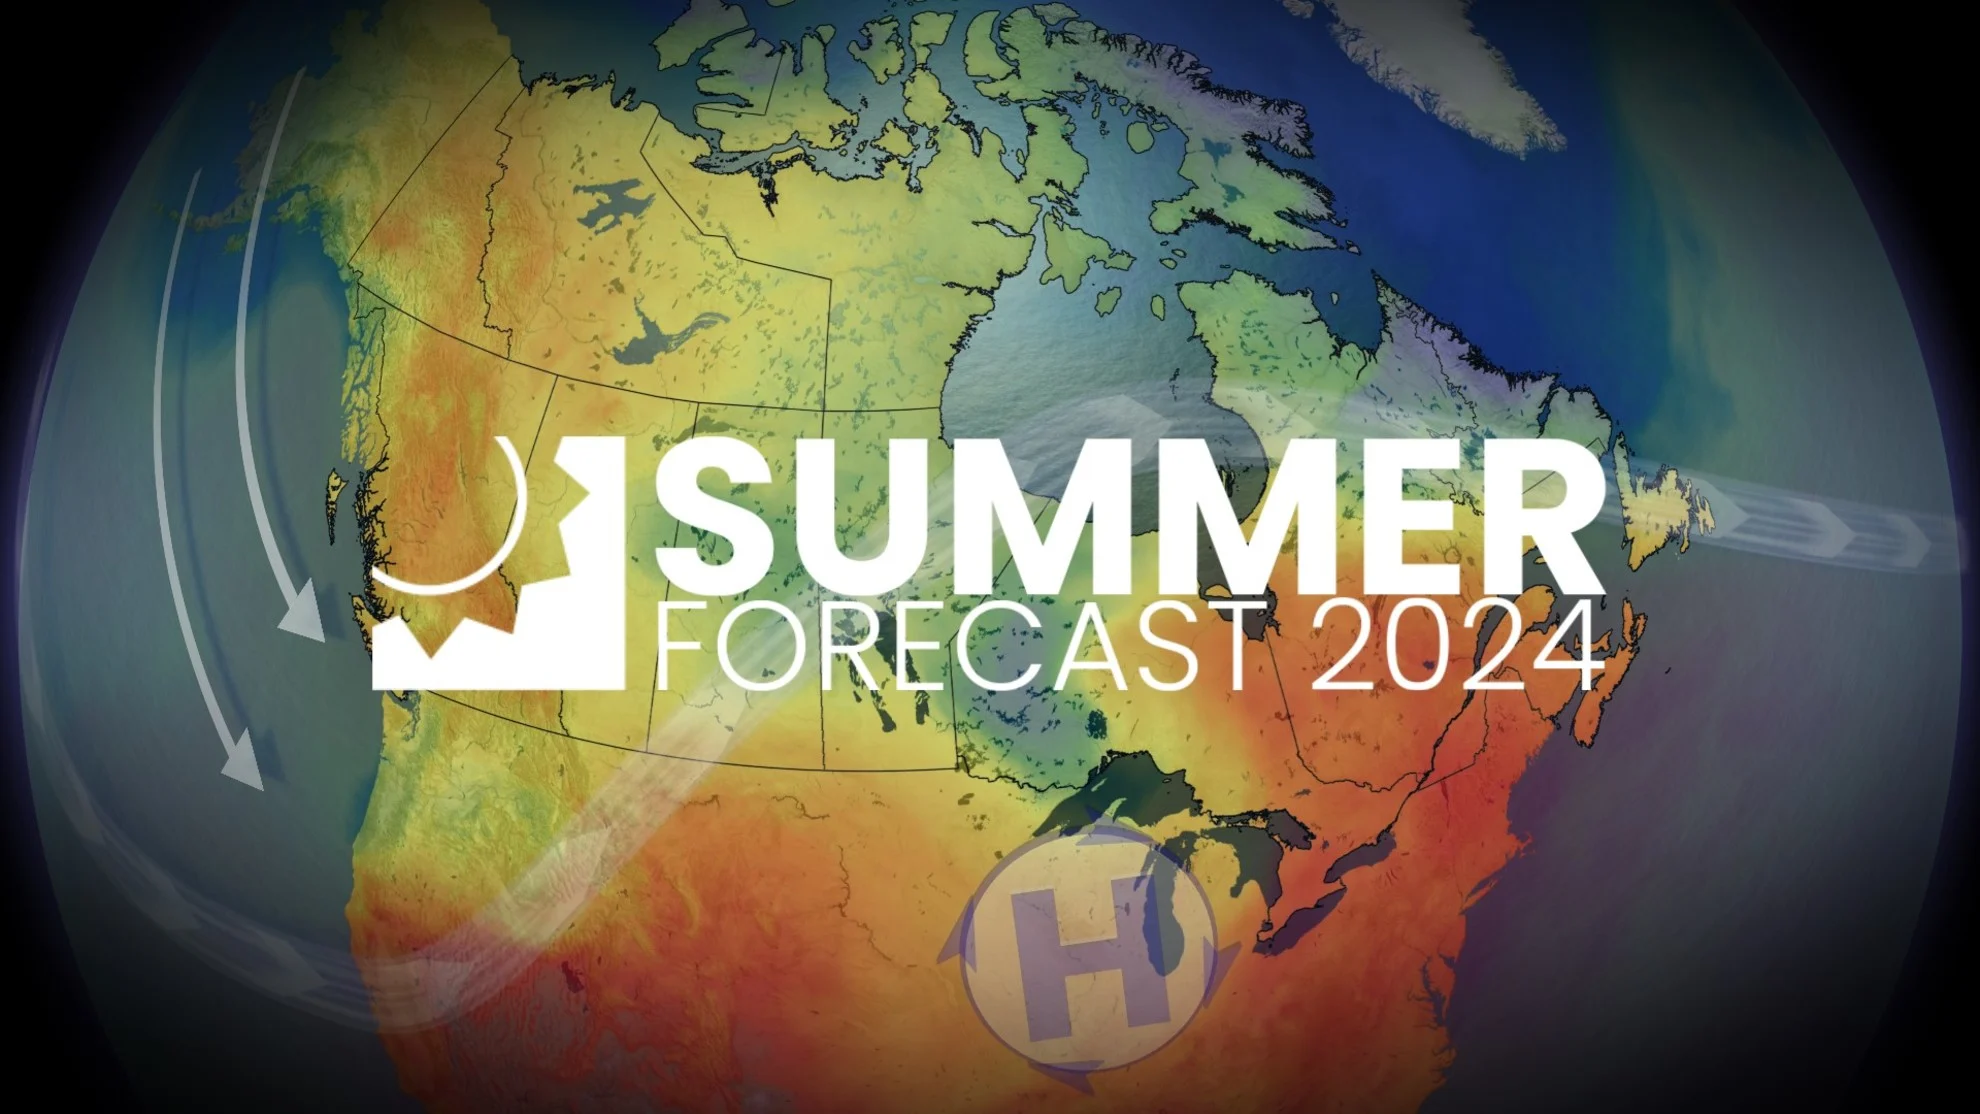 Summer is here, Saskatchewan! We could be looking at some ideal conditions this year. See what's ahead, here